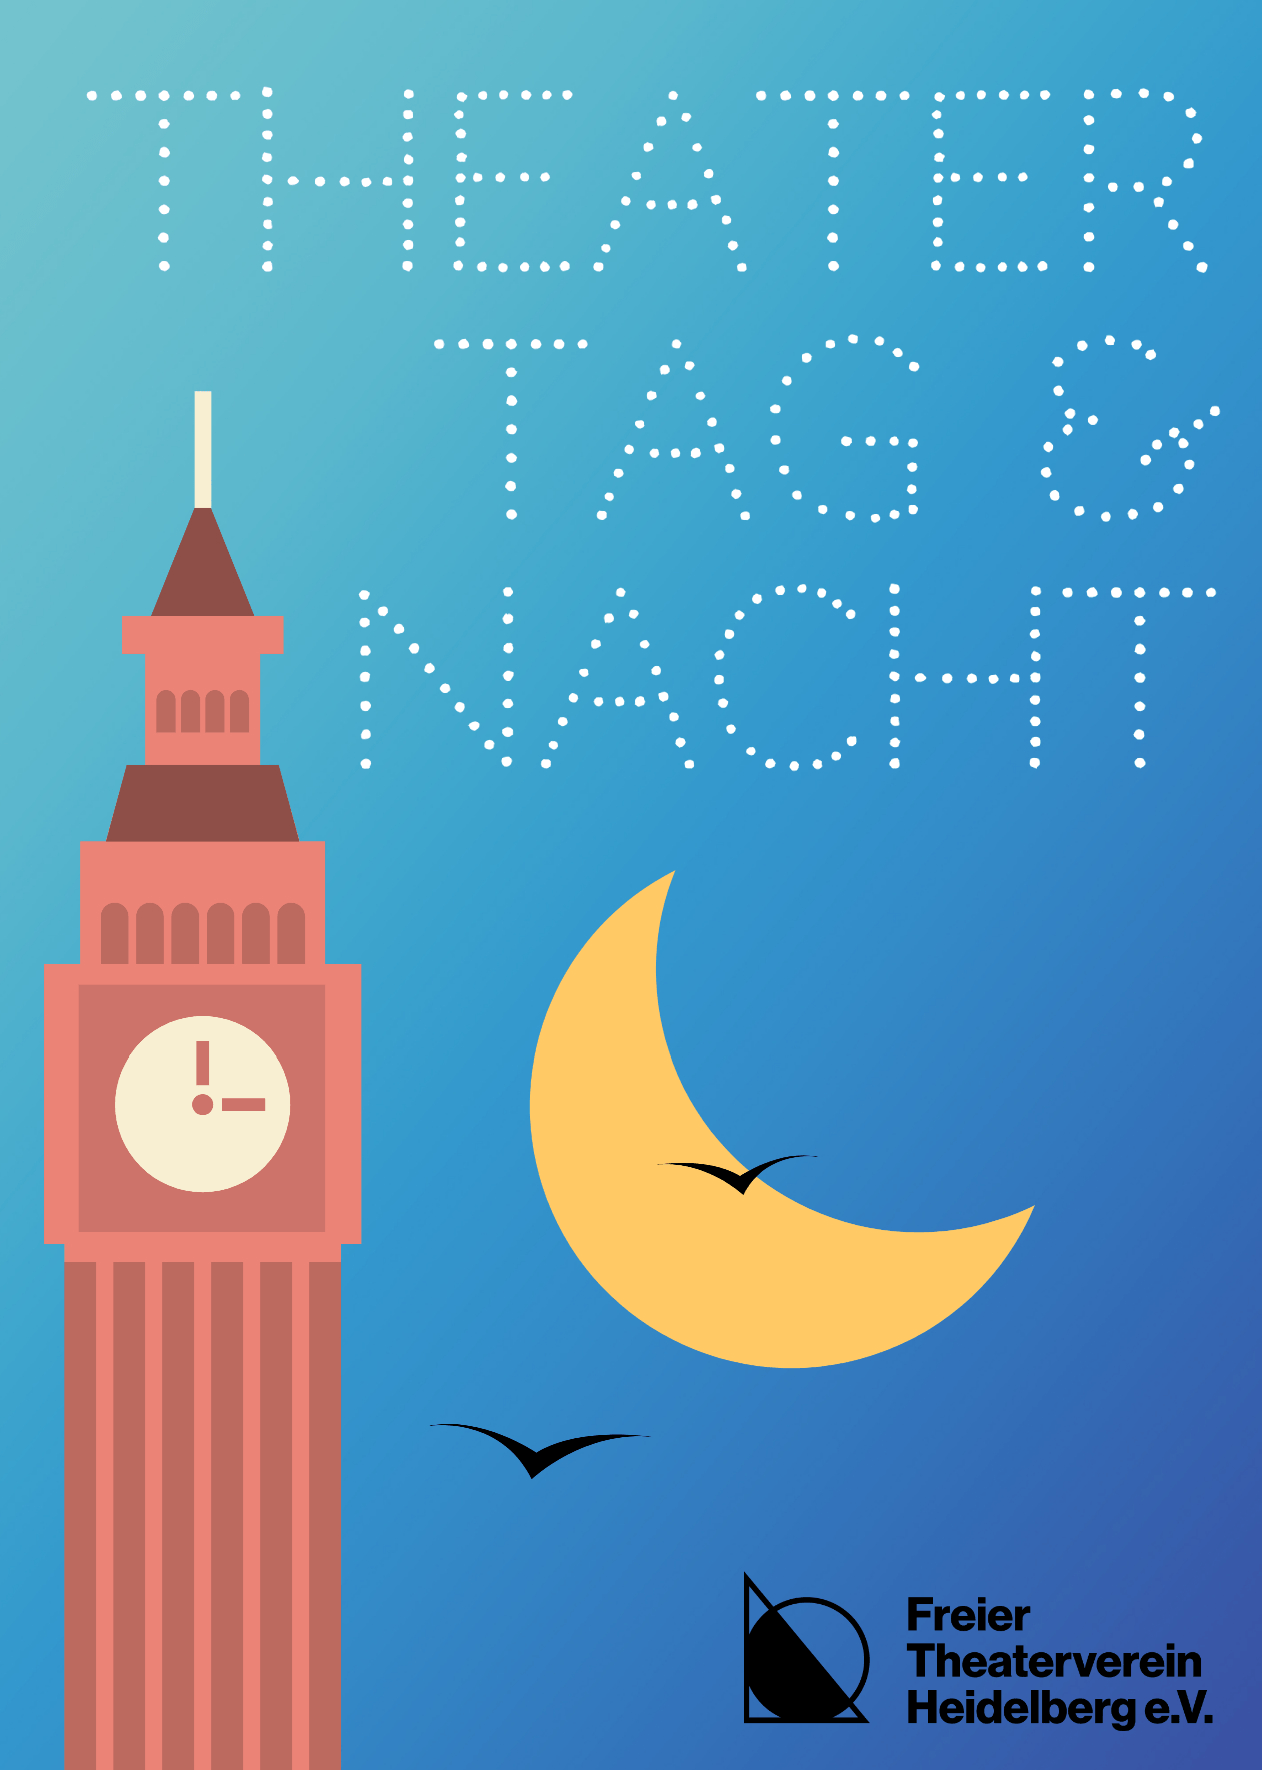 Theater - Tag & Nacht Flyer